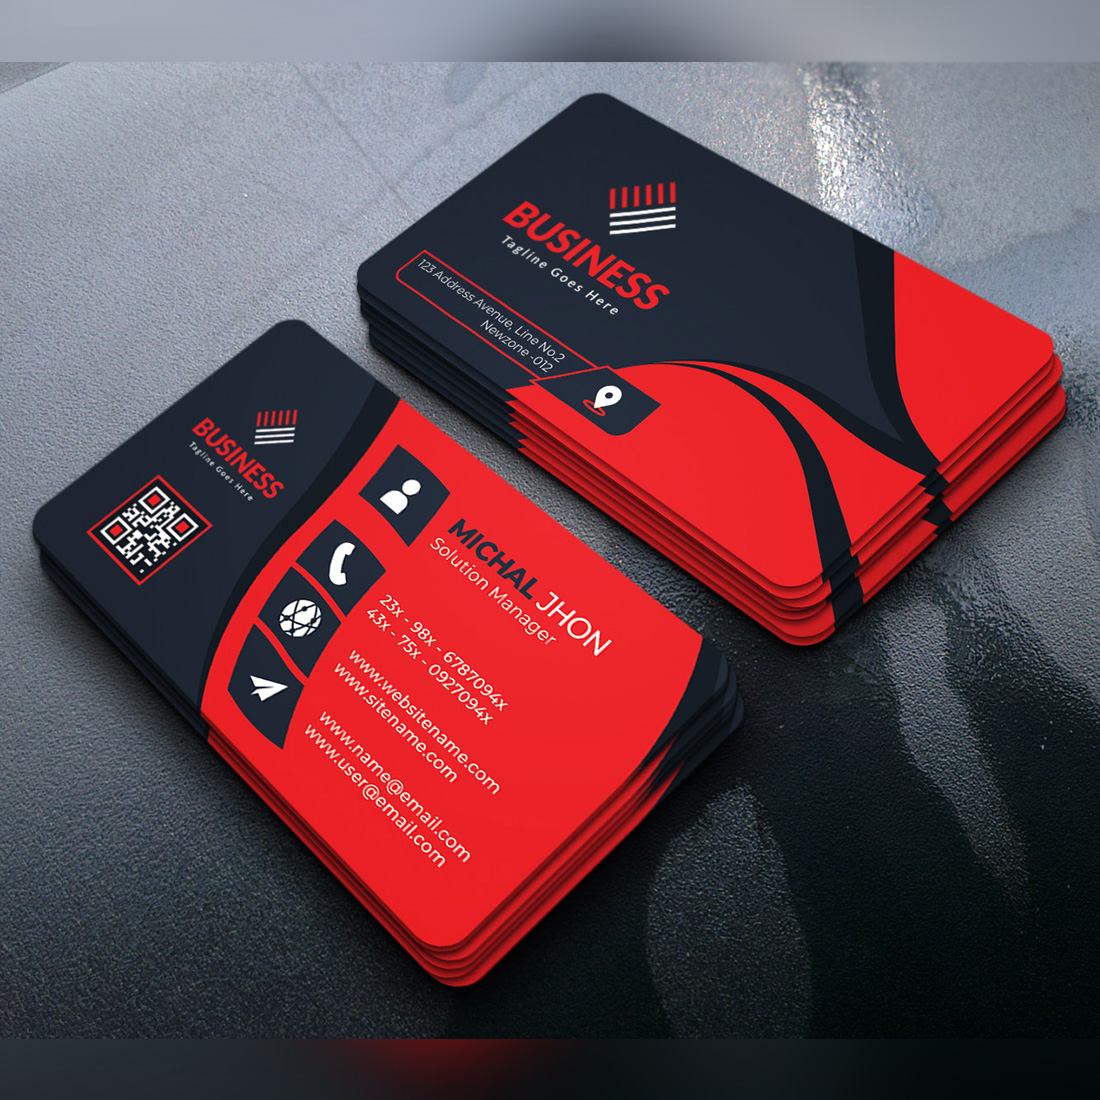 Corporate Red and Dark Modern Business Card Design Template cover image.